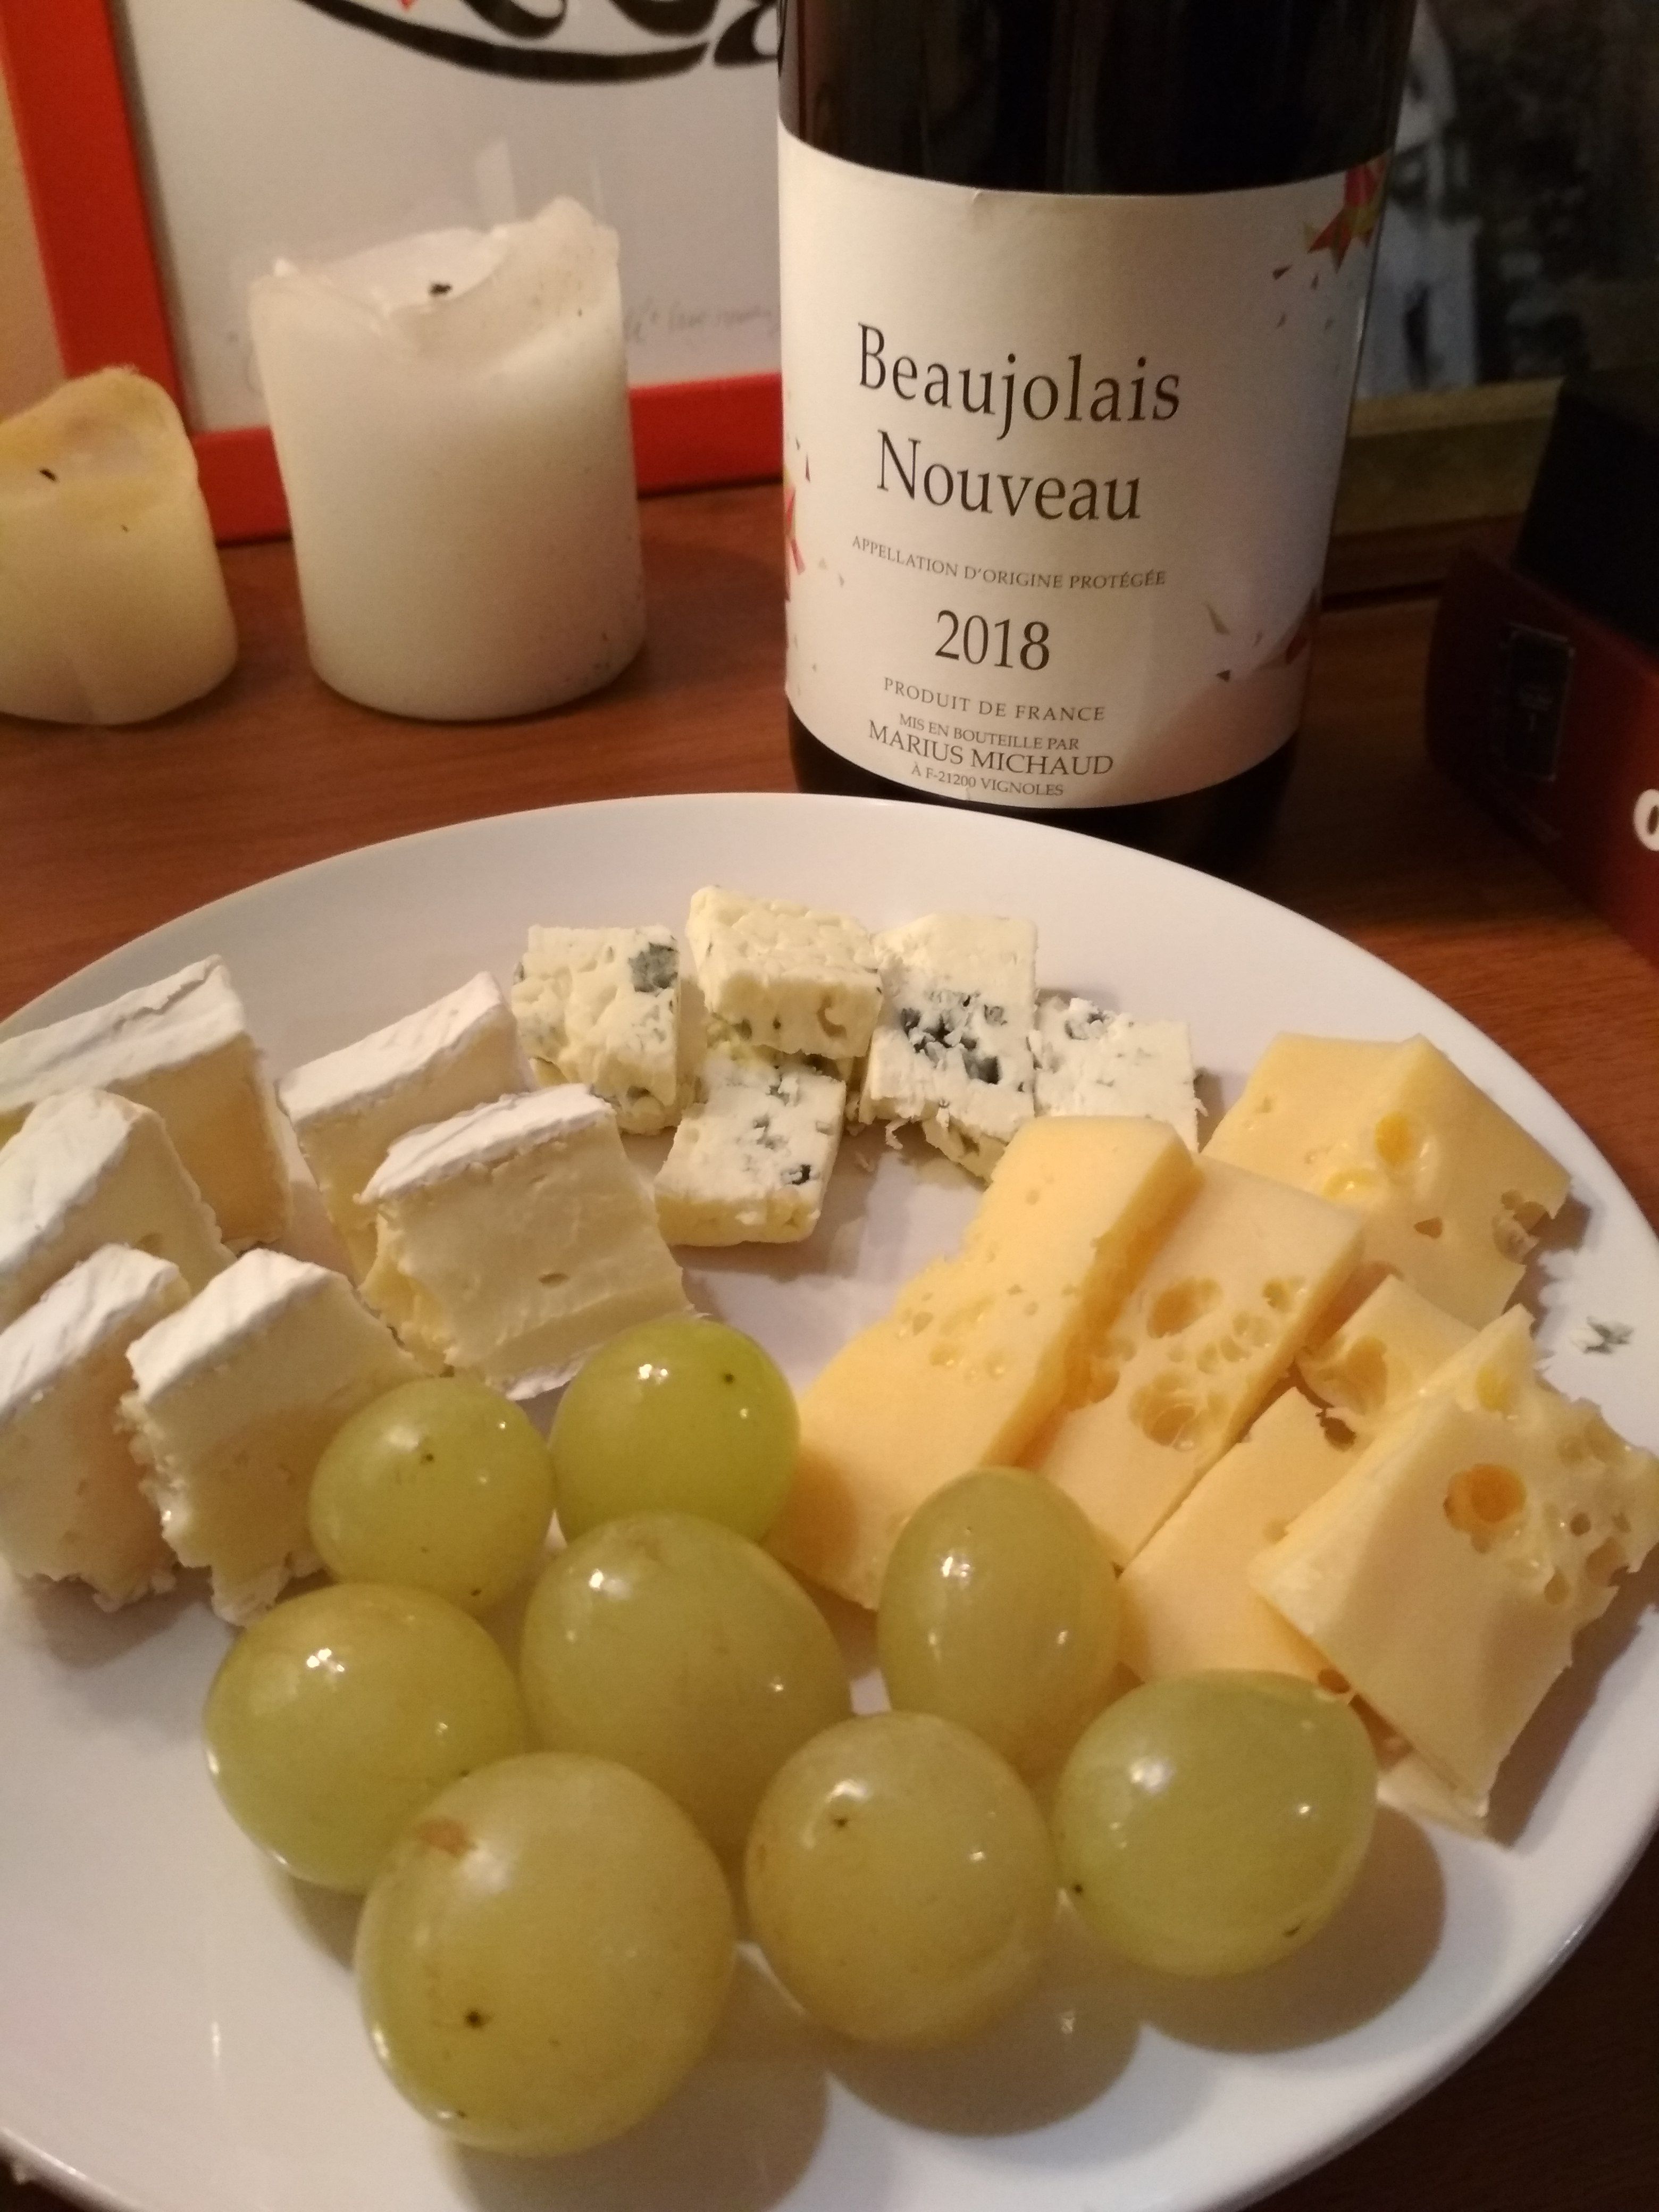 Caption: A photo of a plate with grapes, brie cheese, blue cheese, and Swiss cheese. There are two candles, and a bottle of red Beaujolais Nouveau wine in the background. (Local Guide @DeniGu)